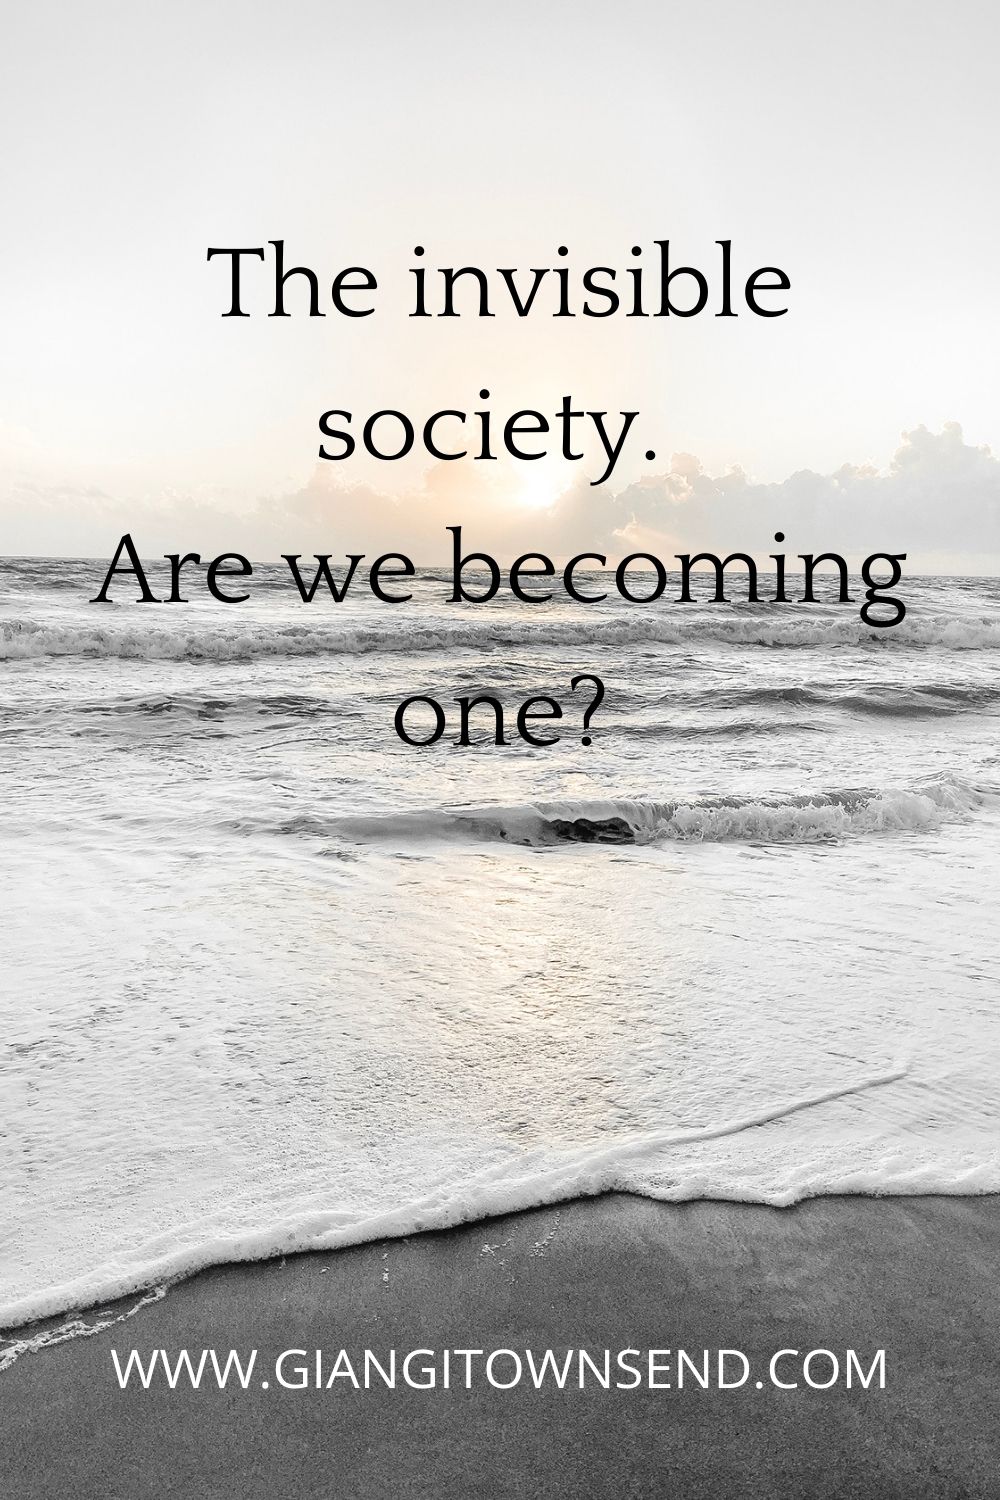 The invisible society. Are we becoming one?